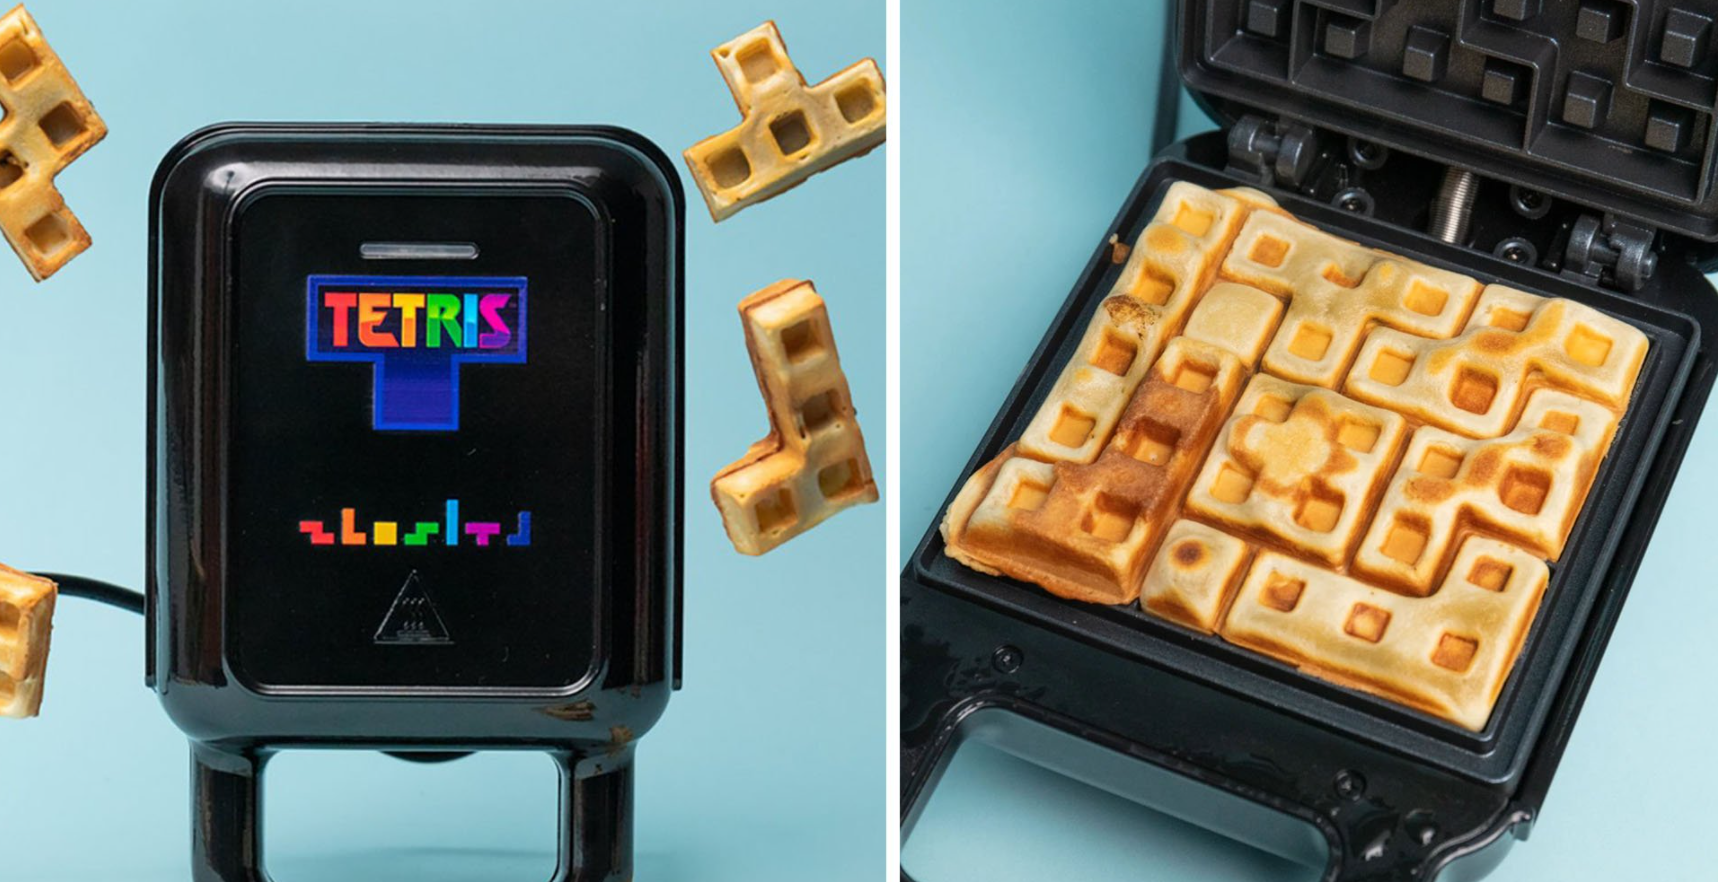 Photo of a Tetris waffle maker. Yes, it exists.